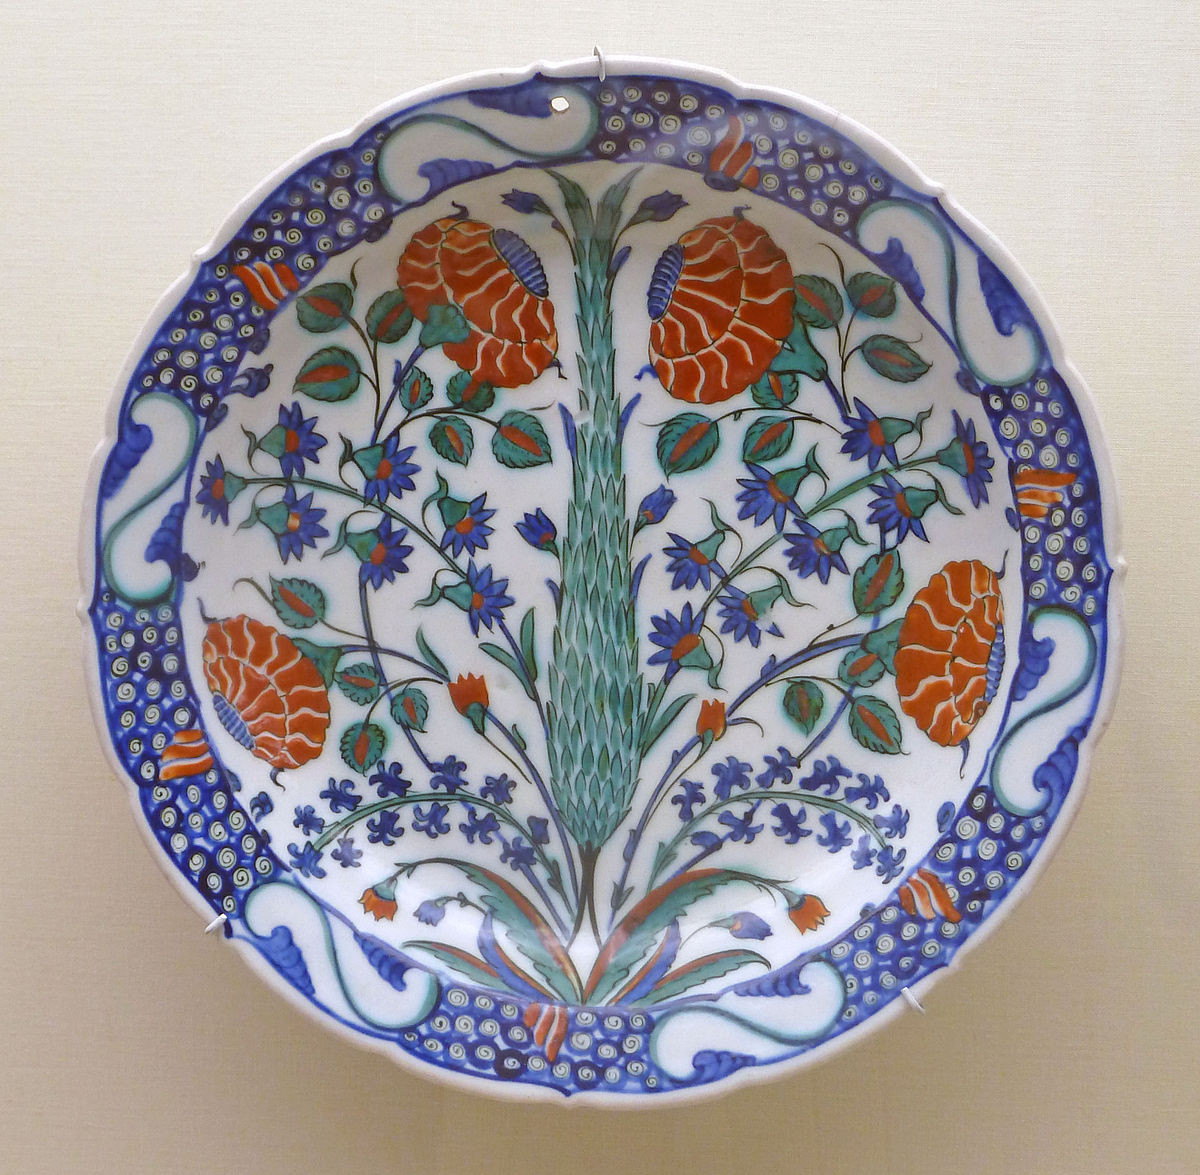 22 Lovable Old oriental Vases 2024 free download old oriental vases of iznik pottery wikipedia intended for 1200px cypress tree decorated ottoman pottery p1000591 jpg